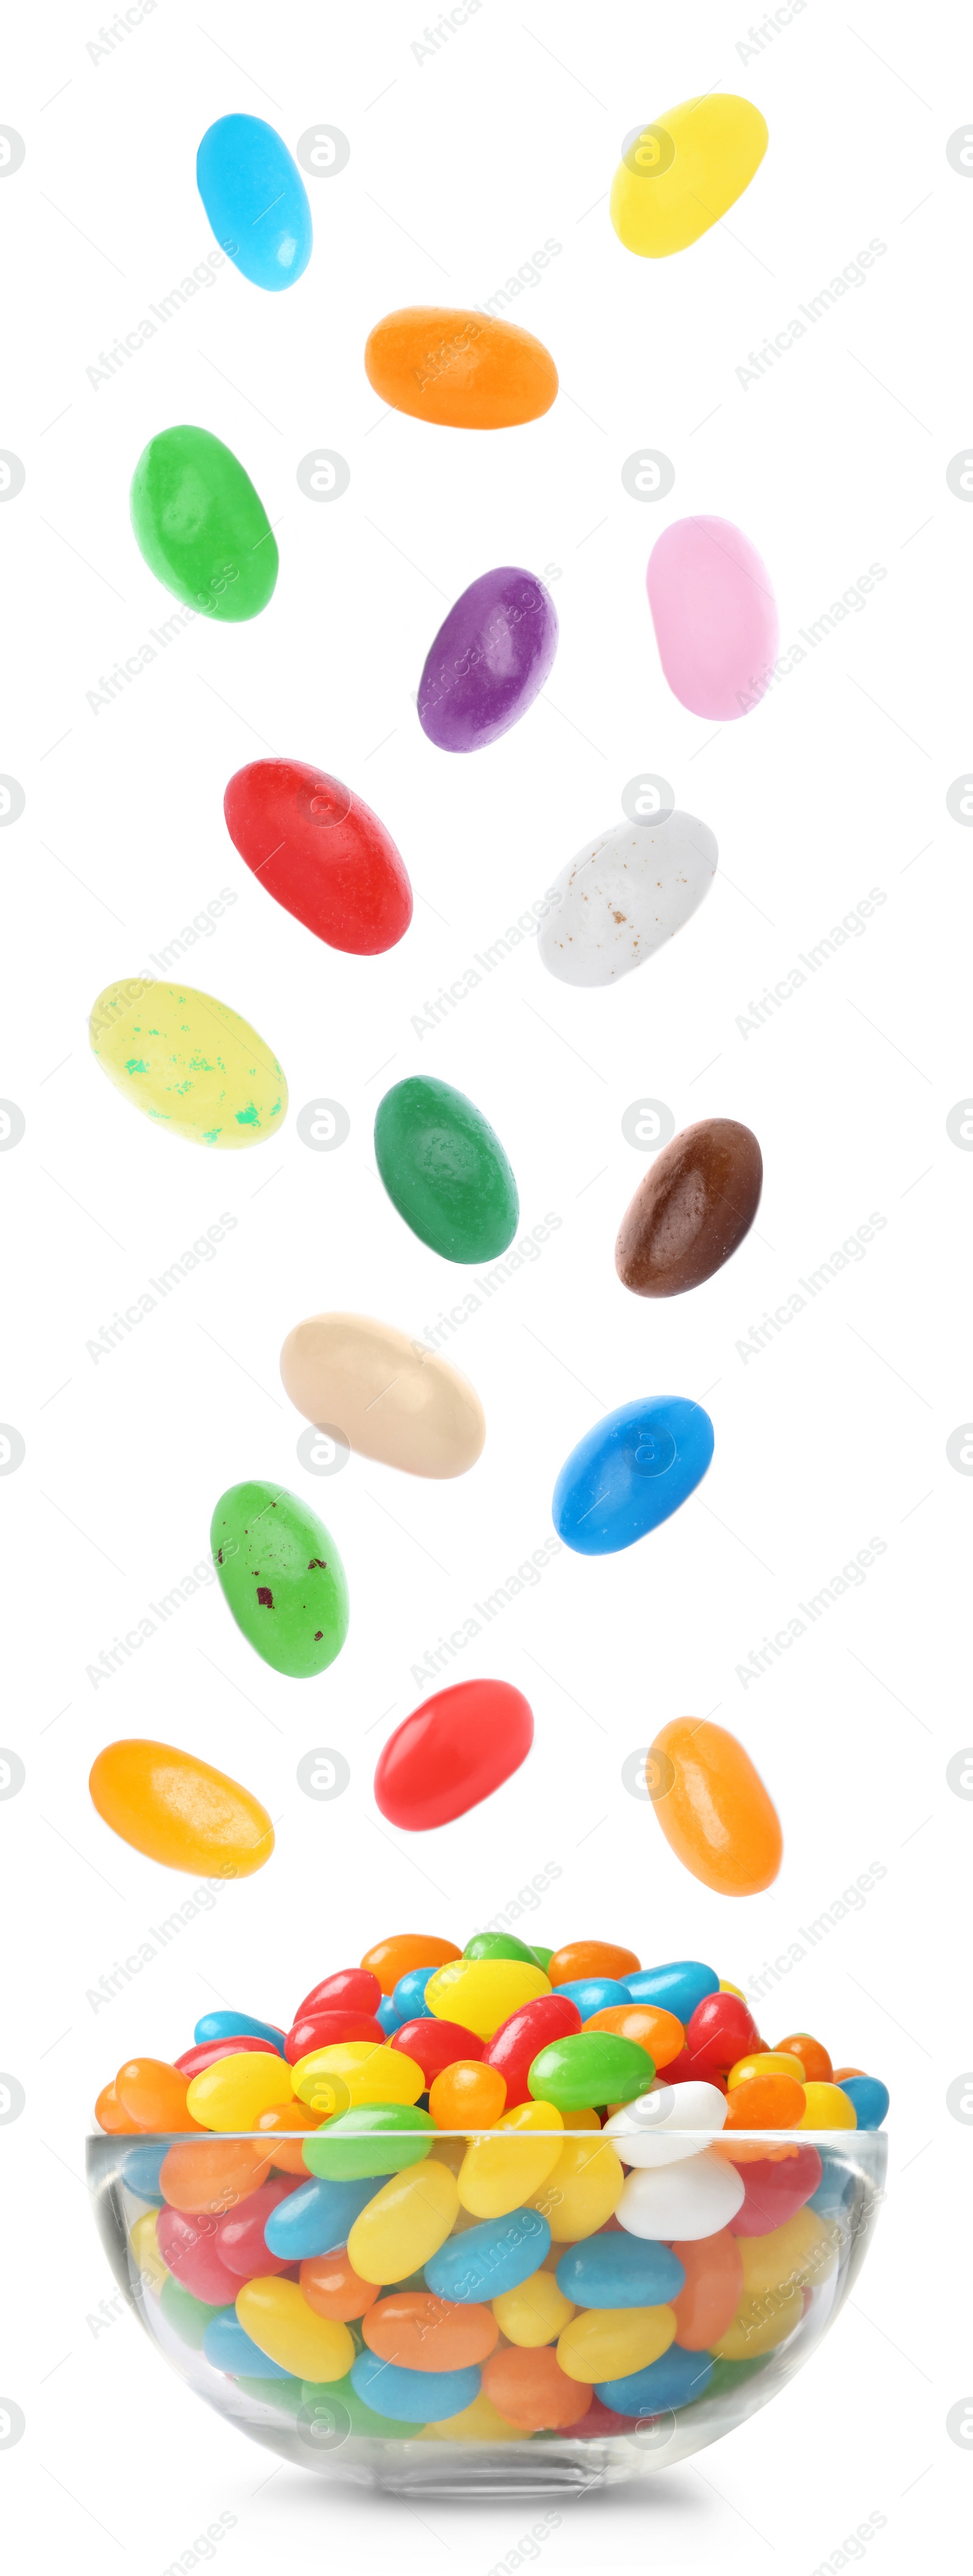 Image of Delicious jelly candies falling into glass bowl on white background